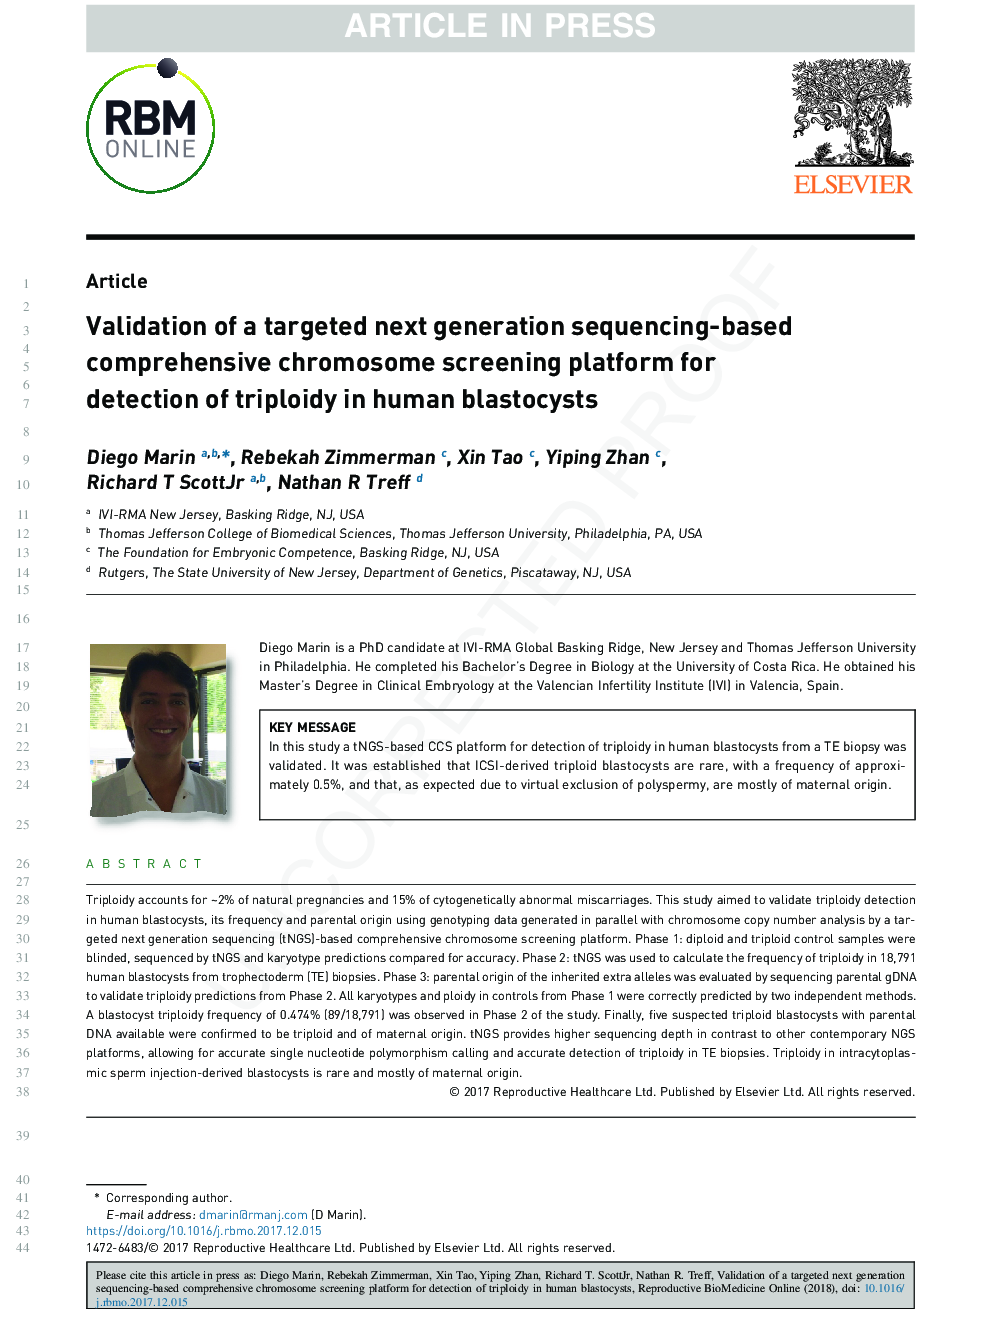 Validation of a targeted next generation sequencing-based comprehensive chromosome screening platform for detection of triploidy in human blastocysts